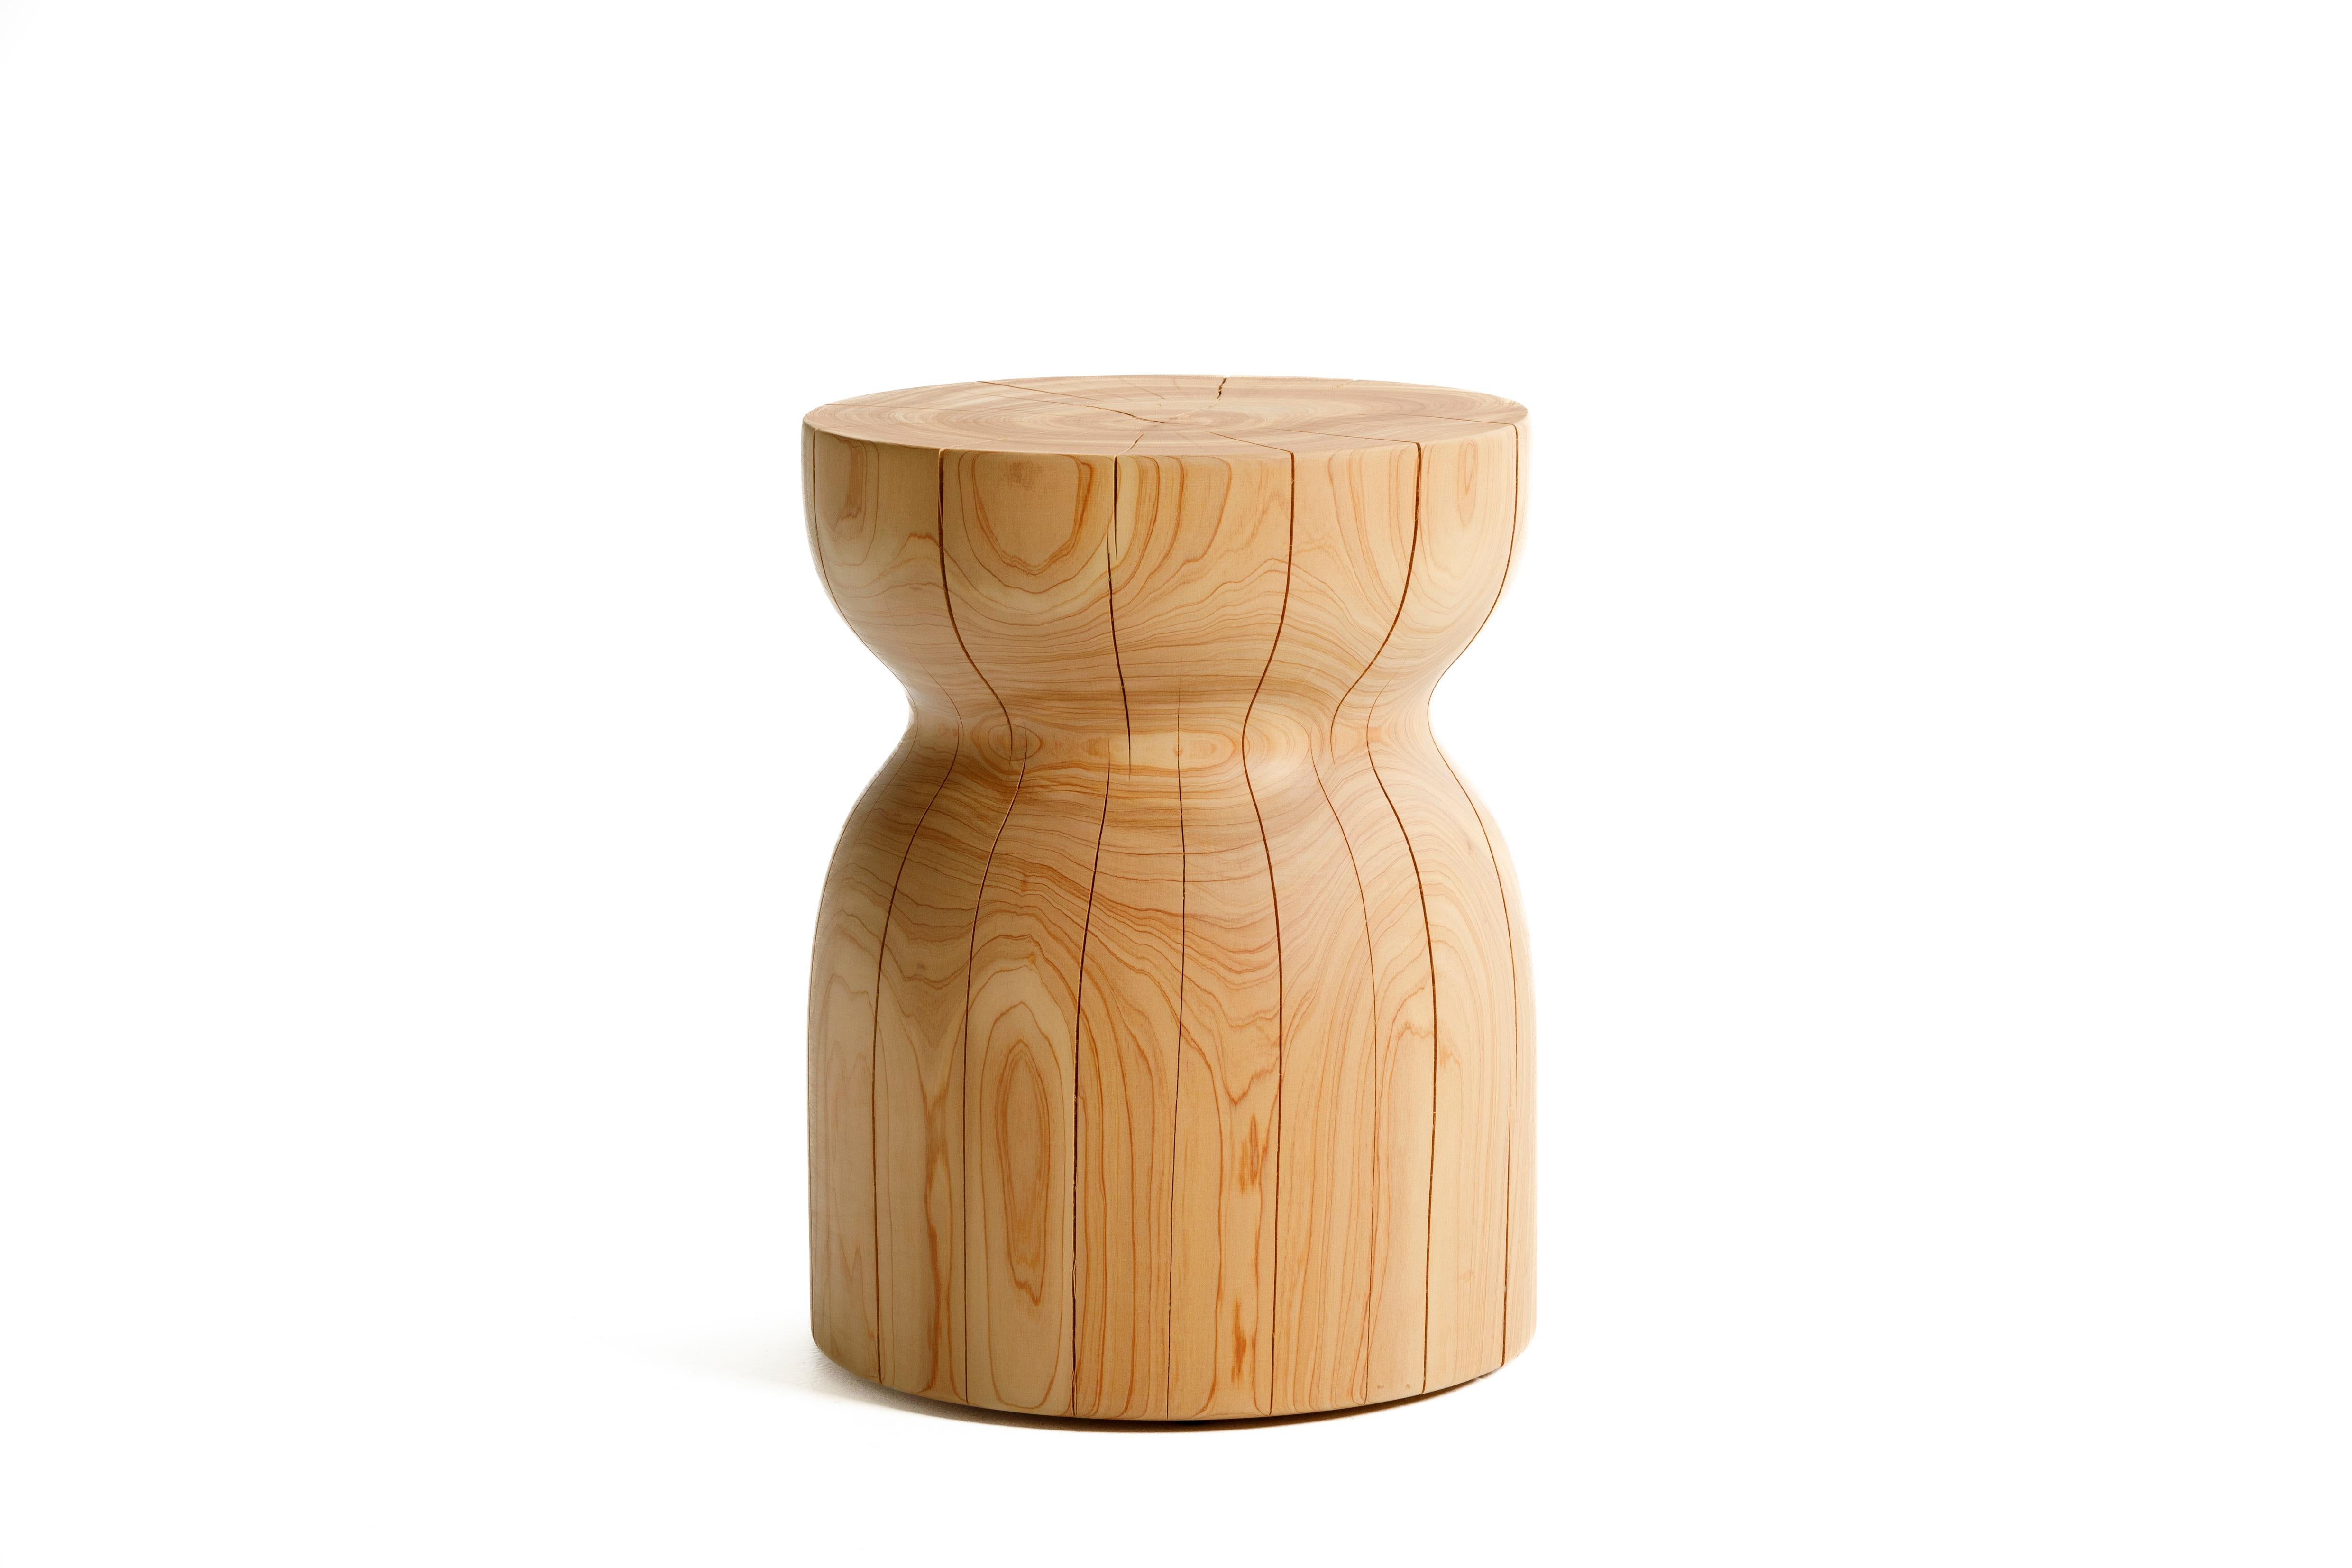 The Emerge side table is a sculptural modern organic side table turned from a solid block of macrocarpa (Monterey Cypress). The wood is finished with a hand rubbed, low V.O.C., natural plant oils to bring the gorgeous grain to life. 

We make timber